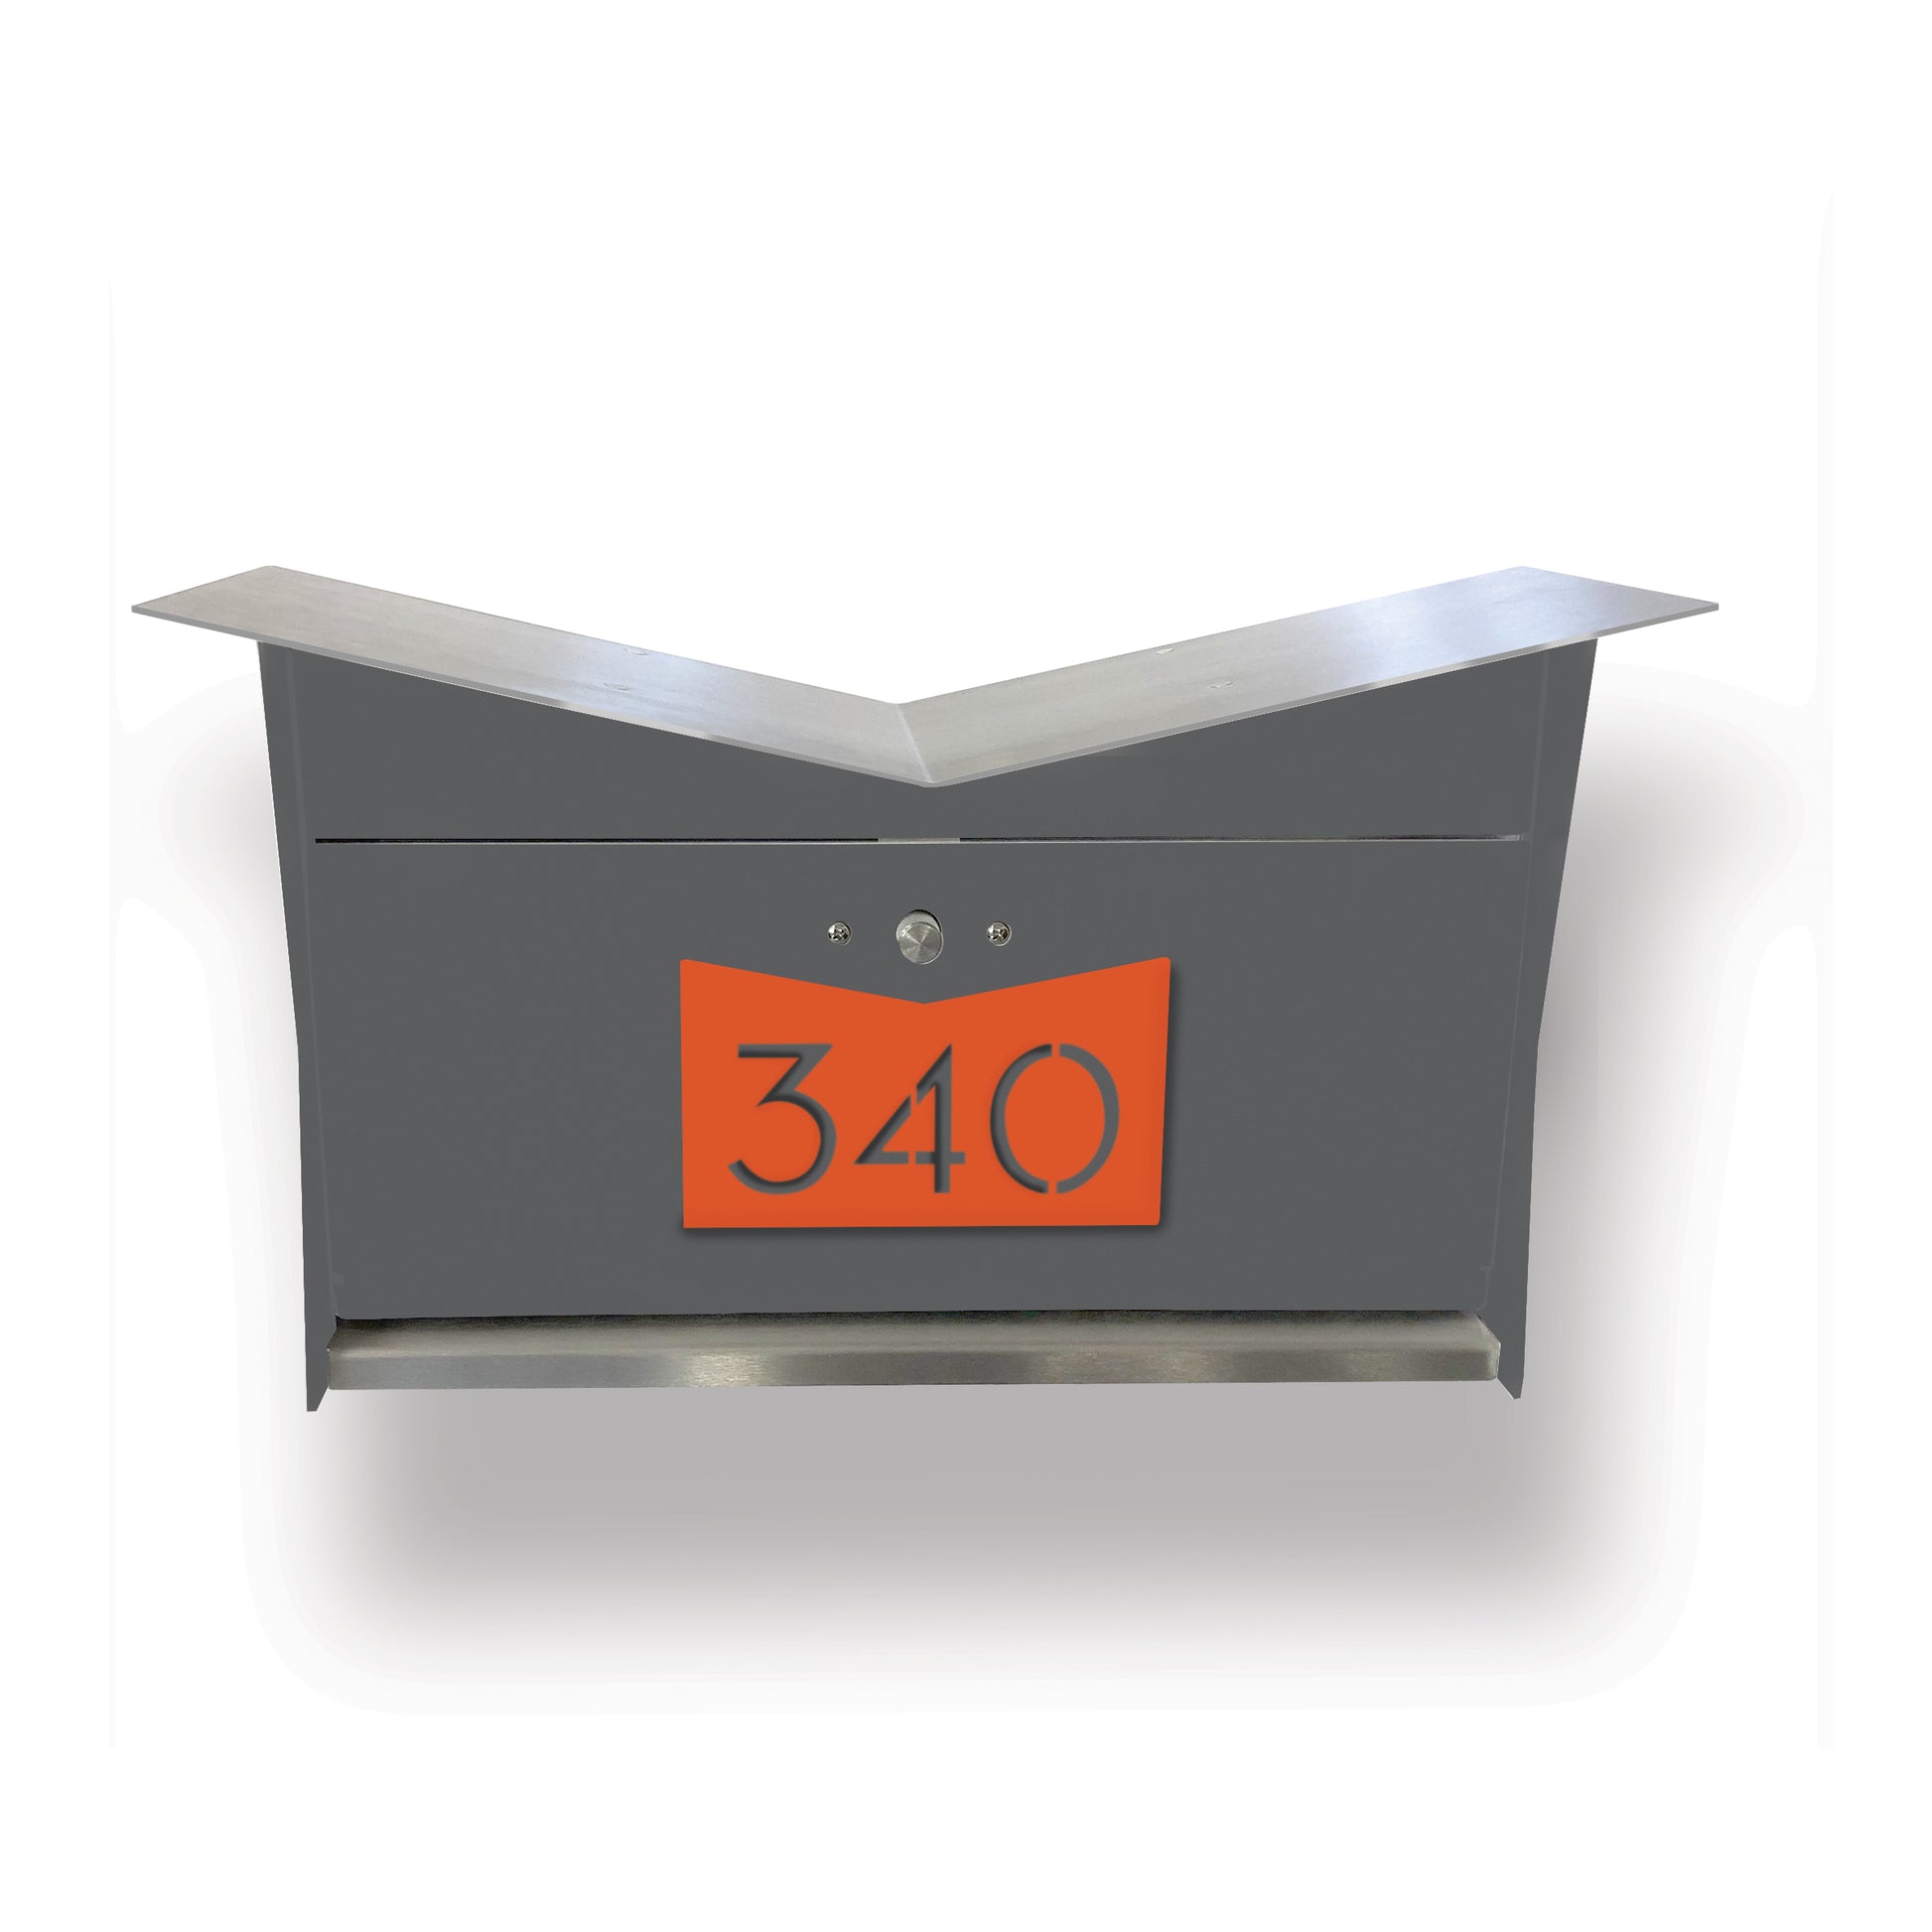 Wall Mount Mailbox | ButterFly Box in designer gray and orange